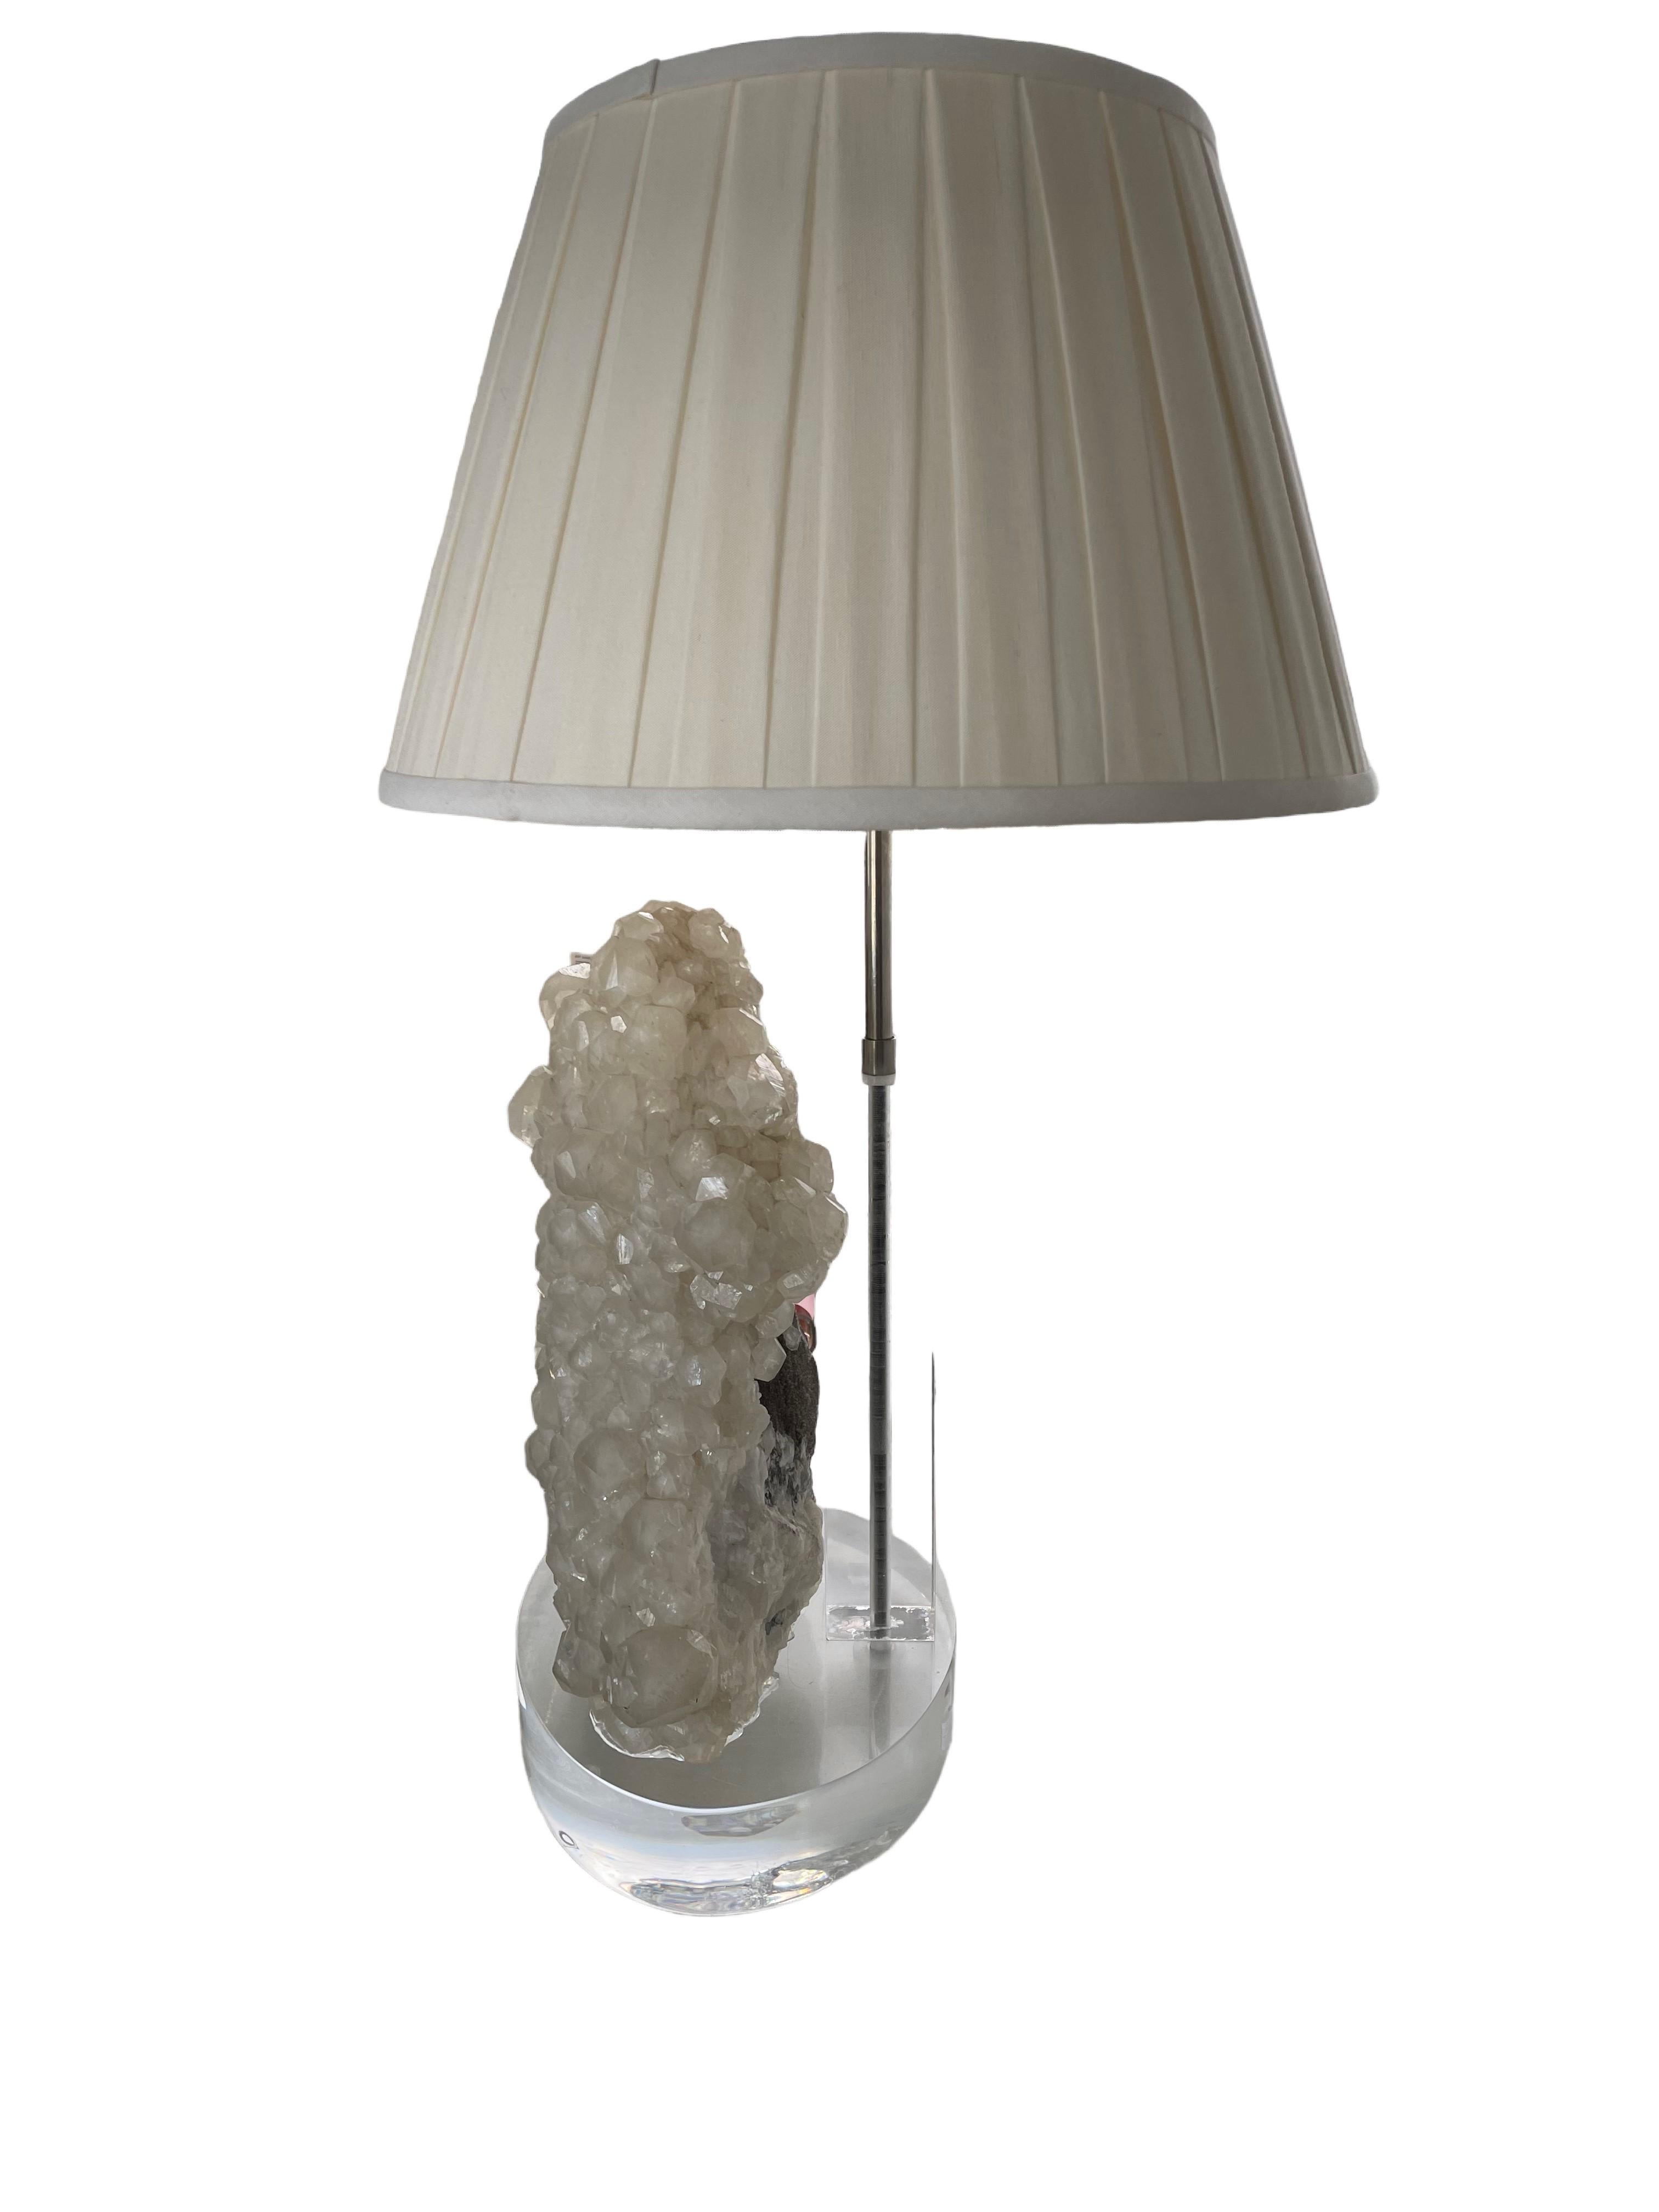 Organic Modern Vintage Quartz Crystal and Lucite Lamp and Shade with Lucite Finial For Sale